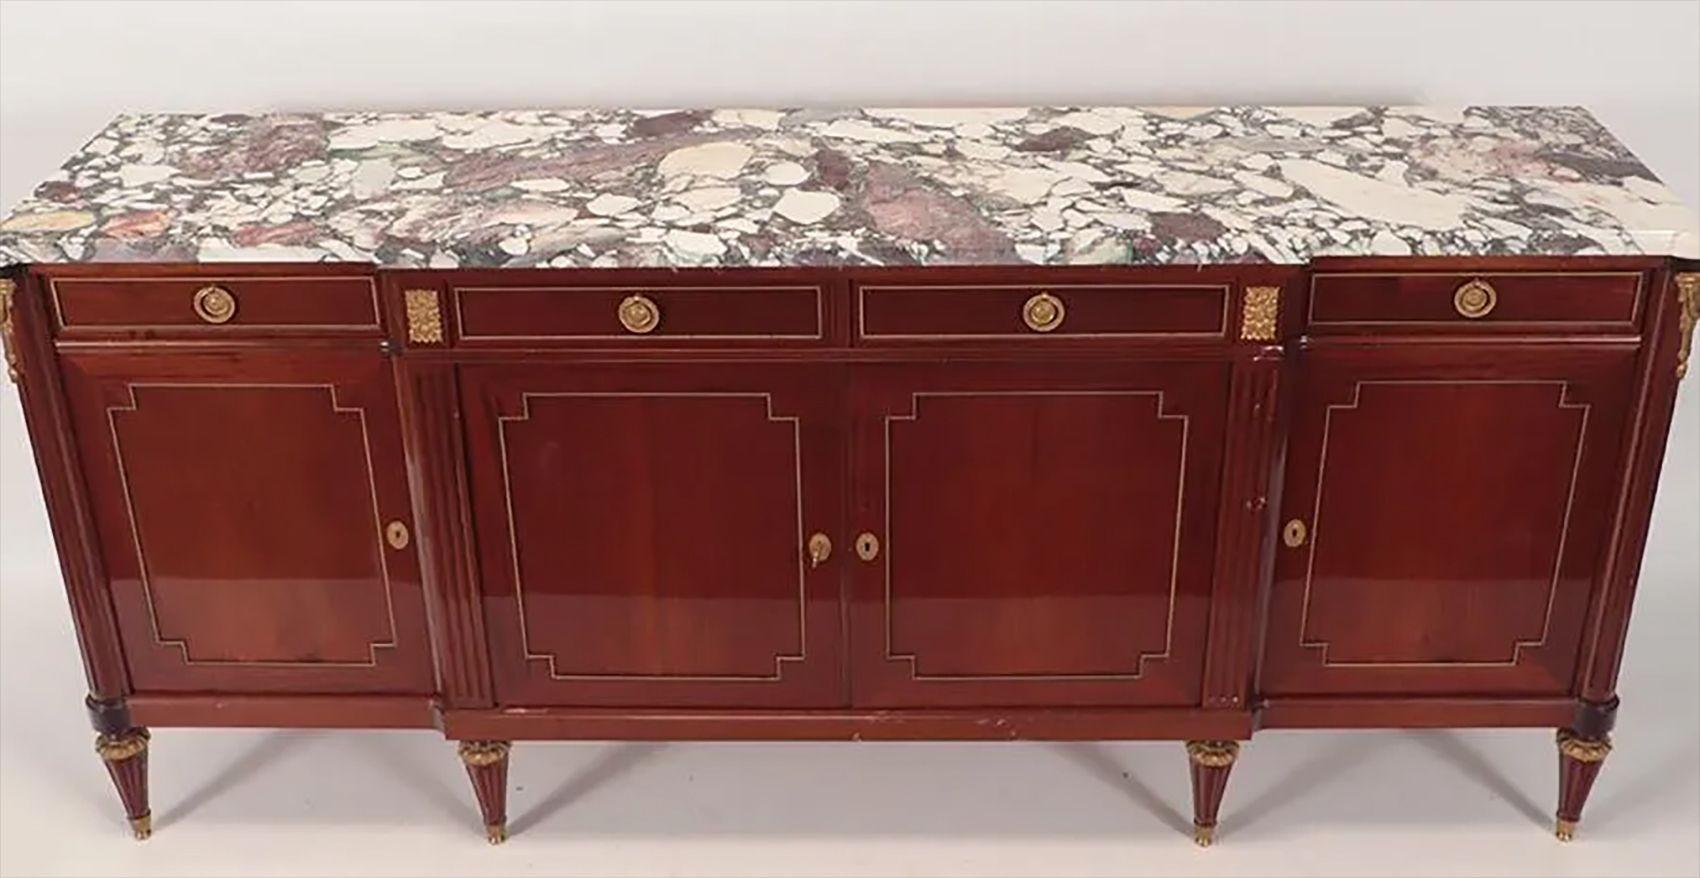 Maison Jansen Louis XVI Style Sideboard, Cabinet, Credenza, Bronze, Marble Top For Sale 1